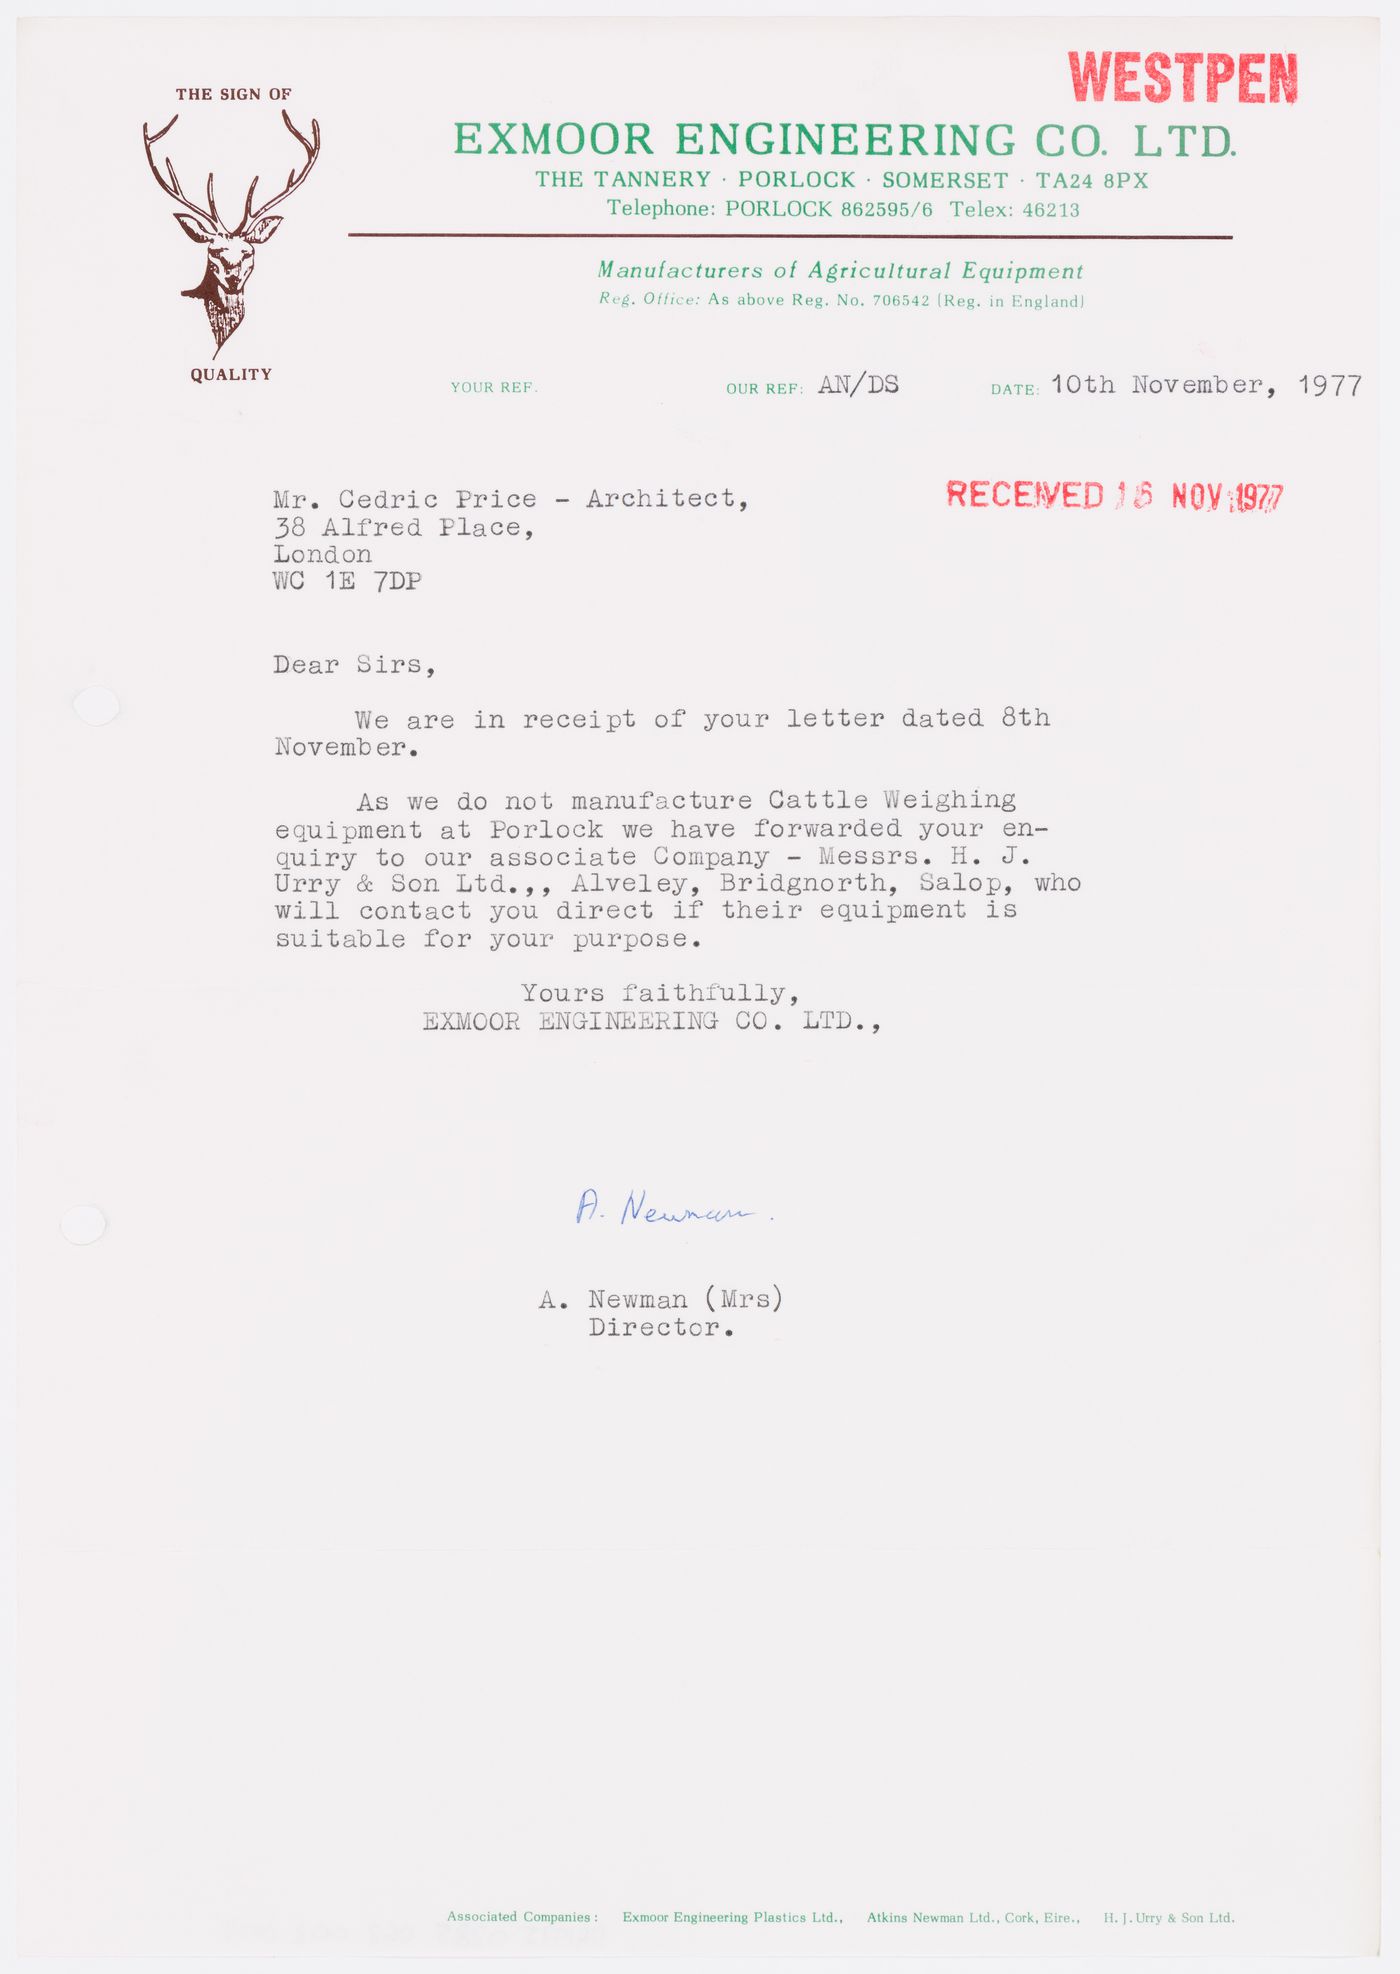 Letter to Cedric Price from Mrs. A. Newman, Director of Exmoor Engineering Co. Ltd.--from the project file "Westpen"